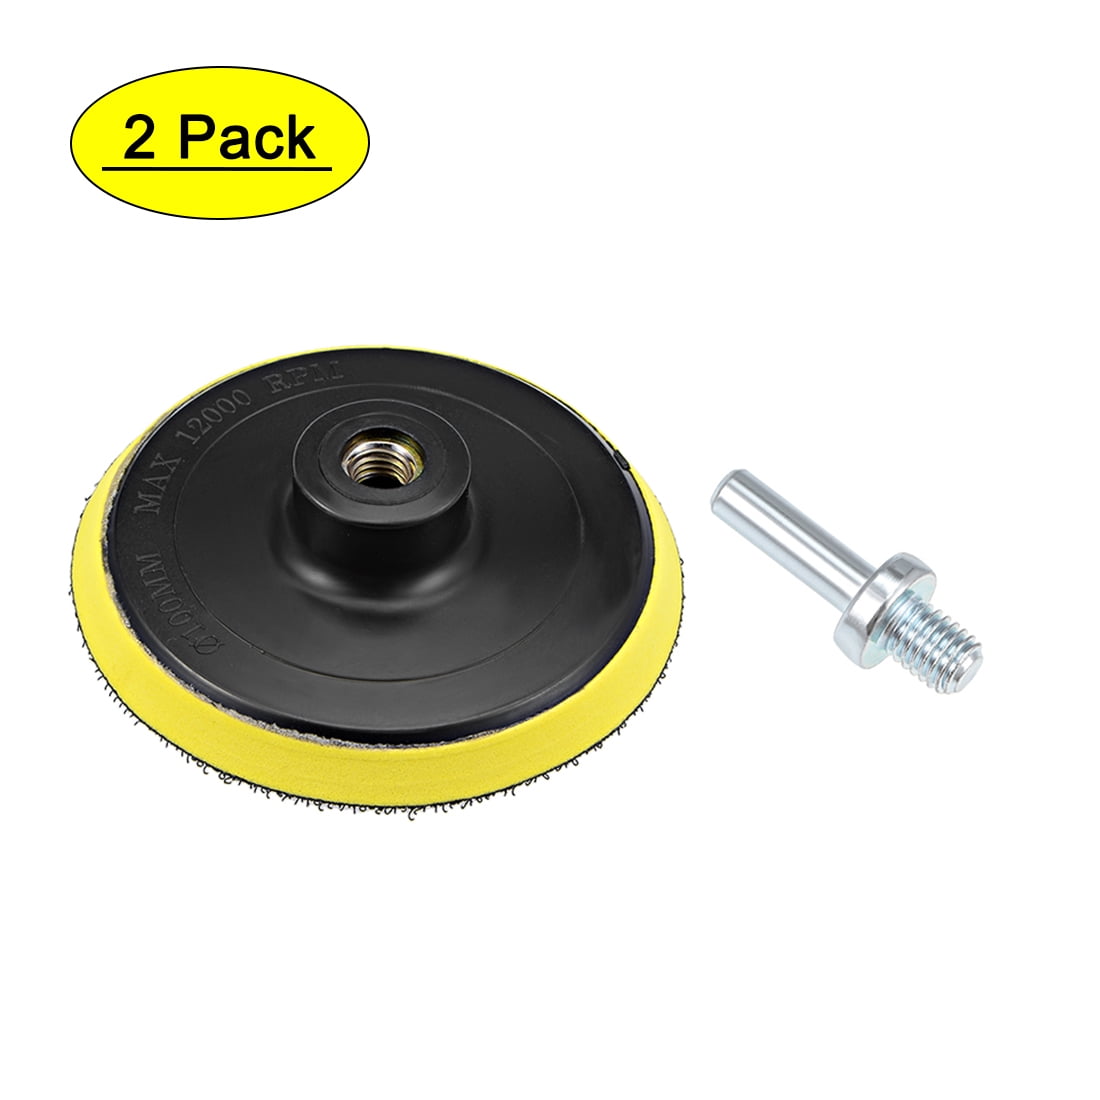 10* Mixed Grit Hook & Loop 100mm Sanding Discs with Backing Pads Drill Adaptor 